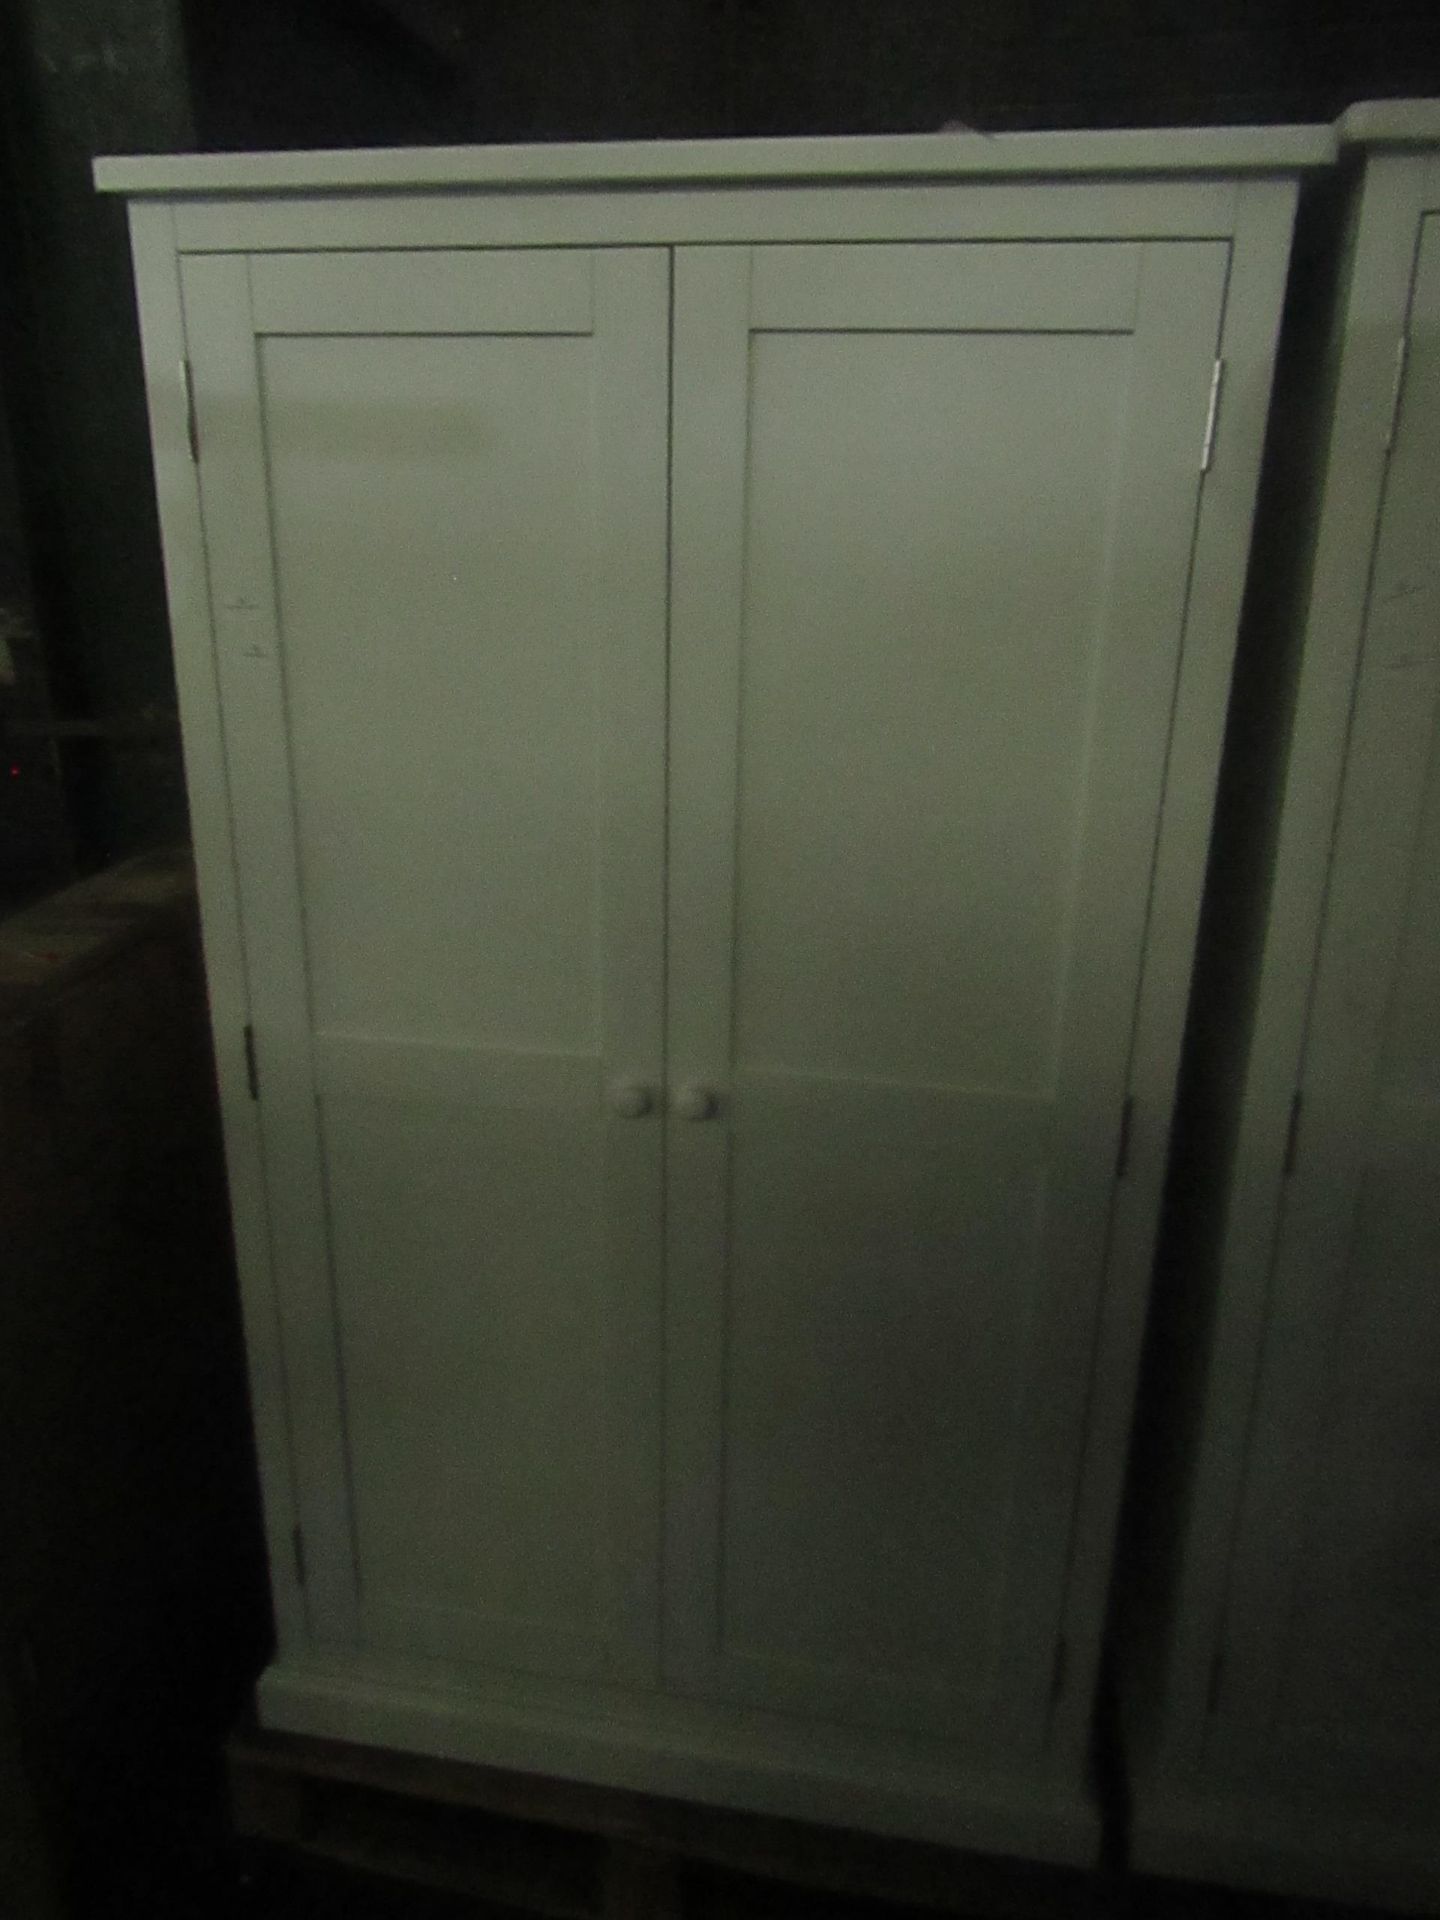 Cotswold Company Littleton Warm White Painted Double Wardrobe RRP Â£495.00 - This item looks to be